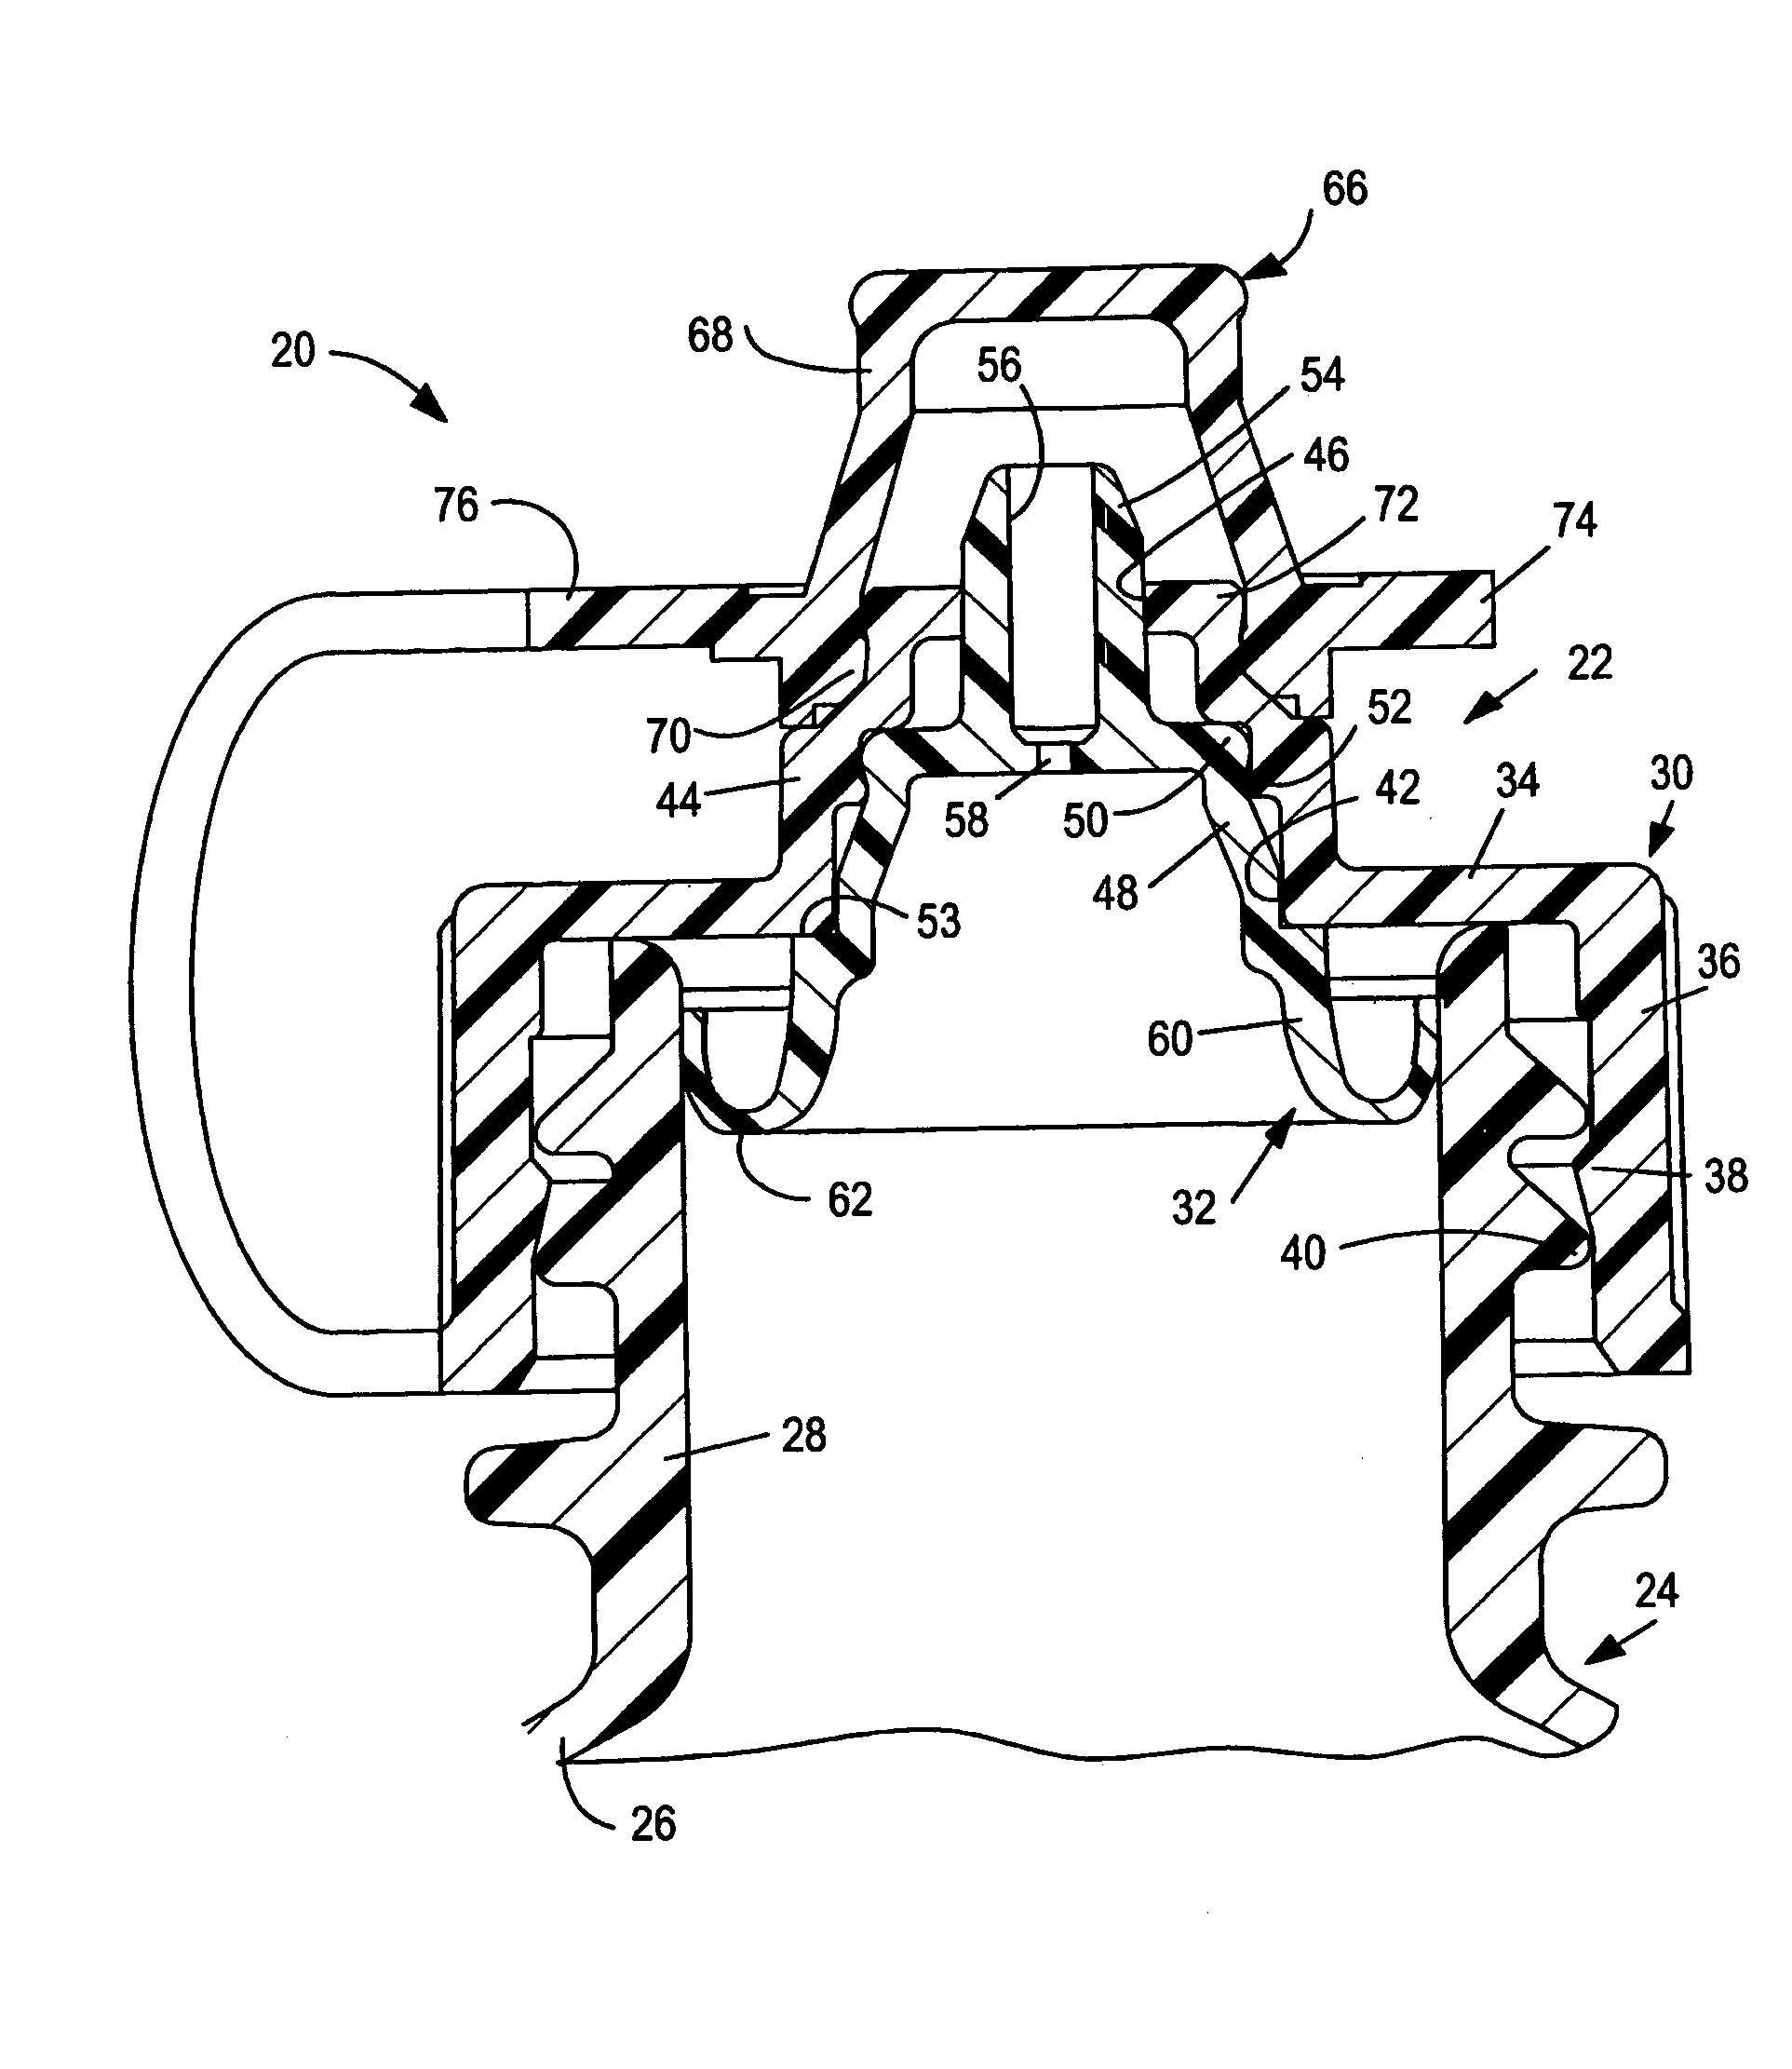 Dispensing closure and package